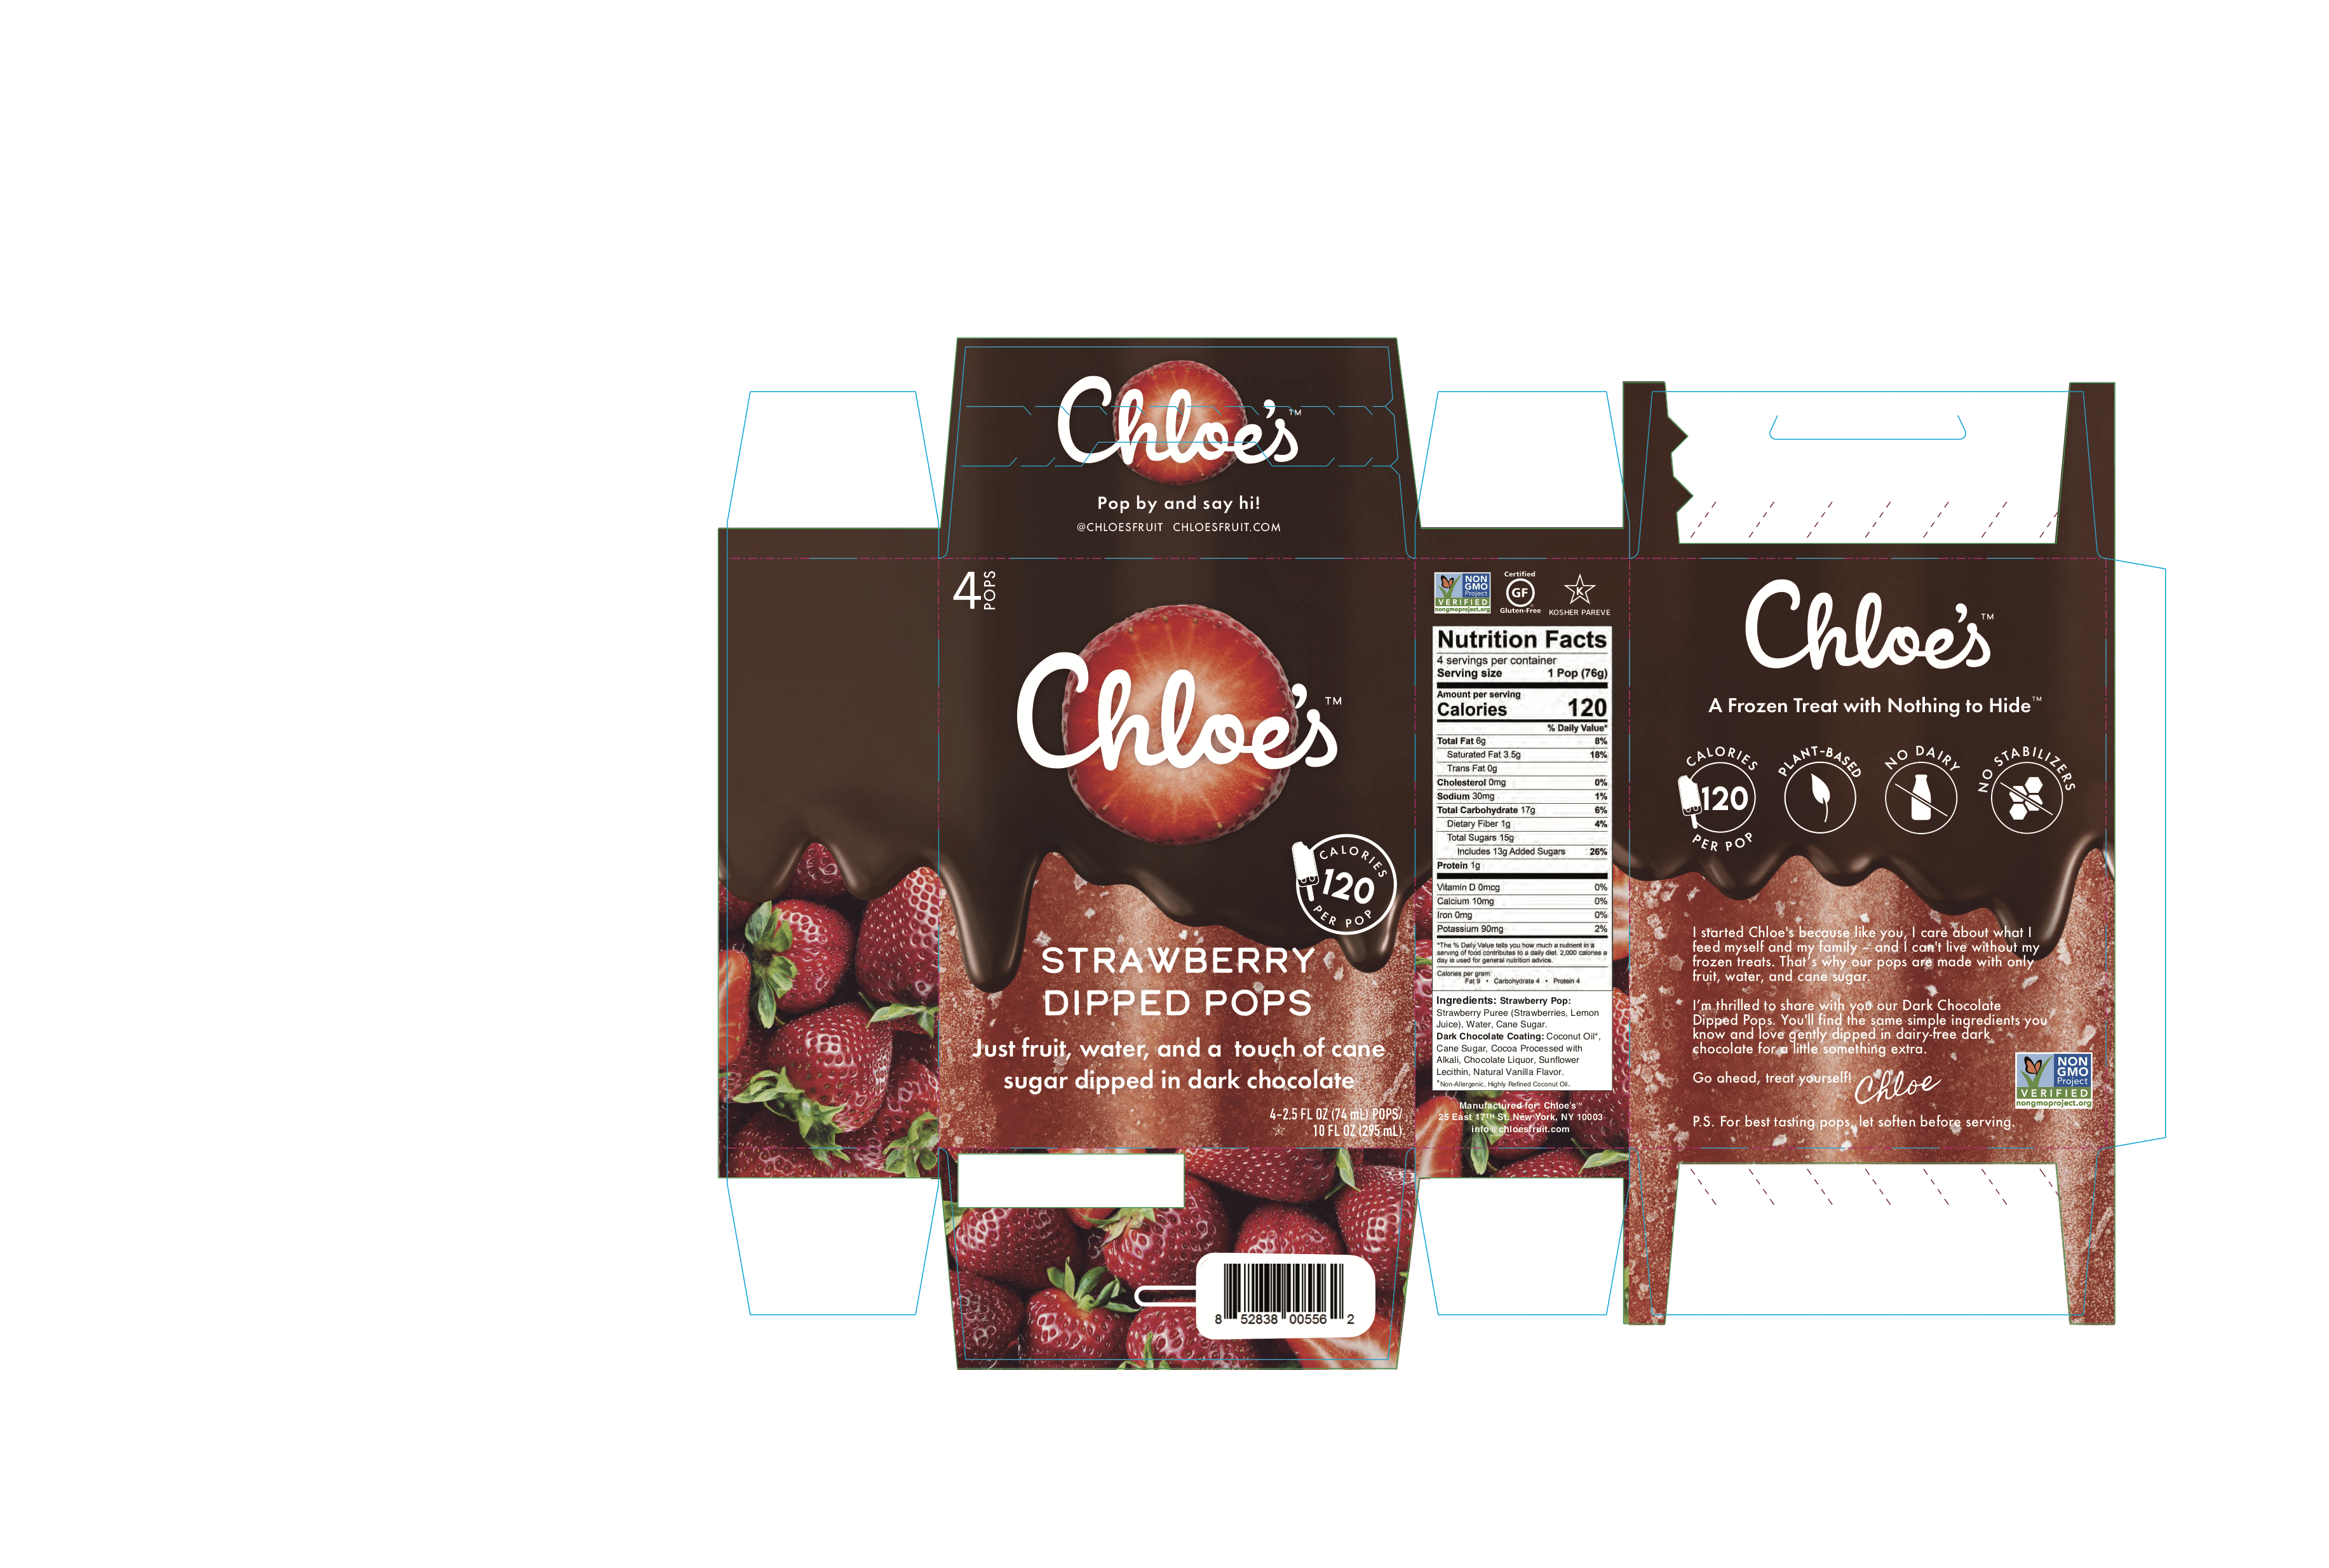 Chloe's Strawberry Dipped Pops 6 units per case 2.5 fl Product Label